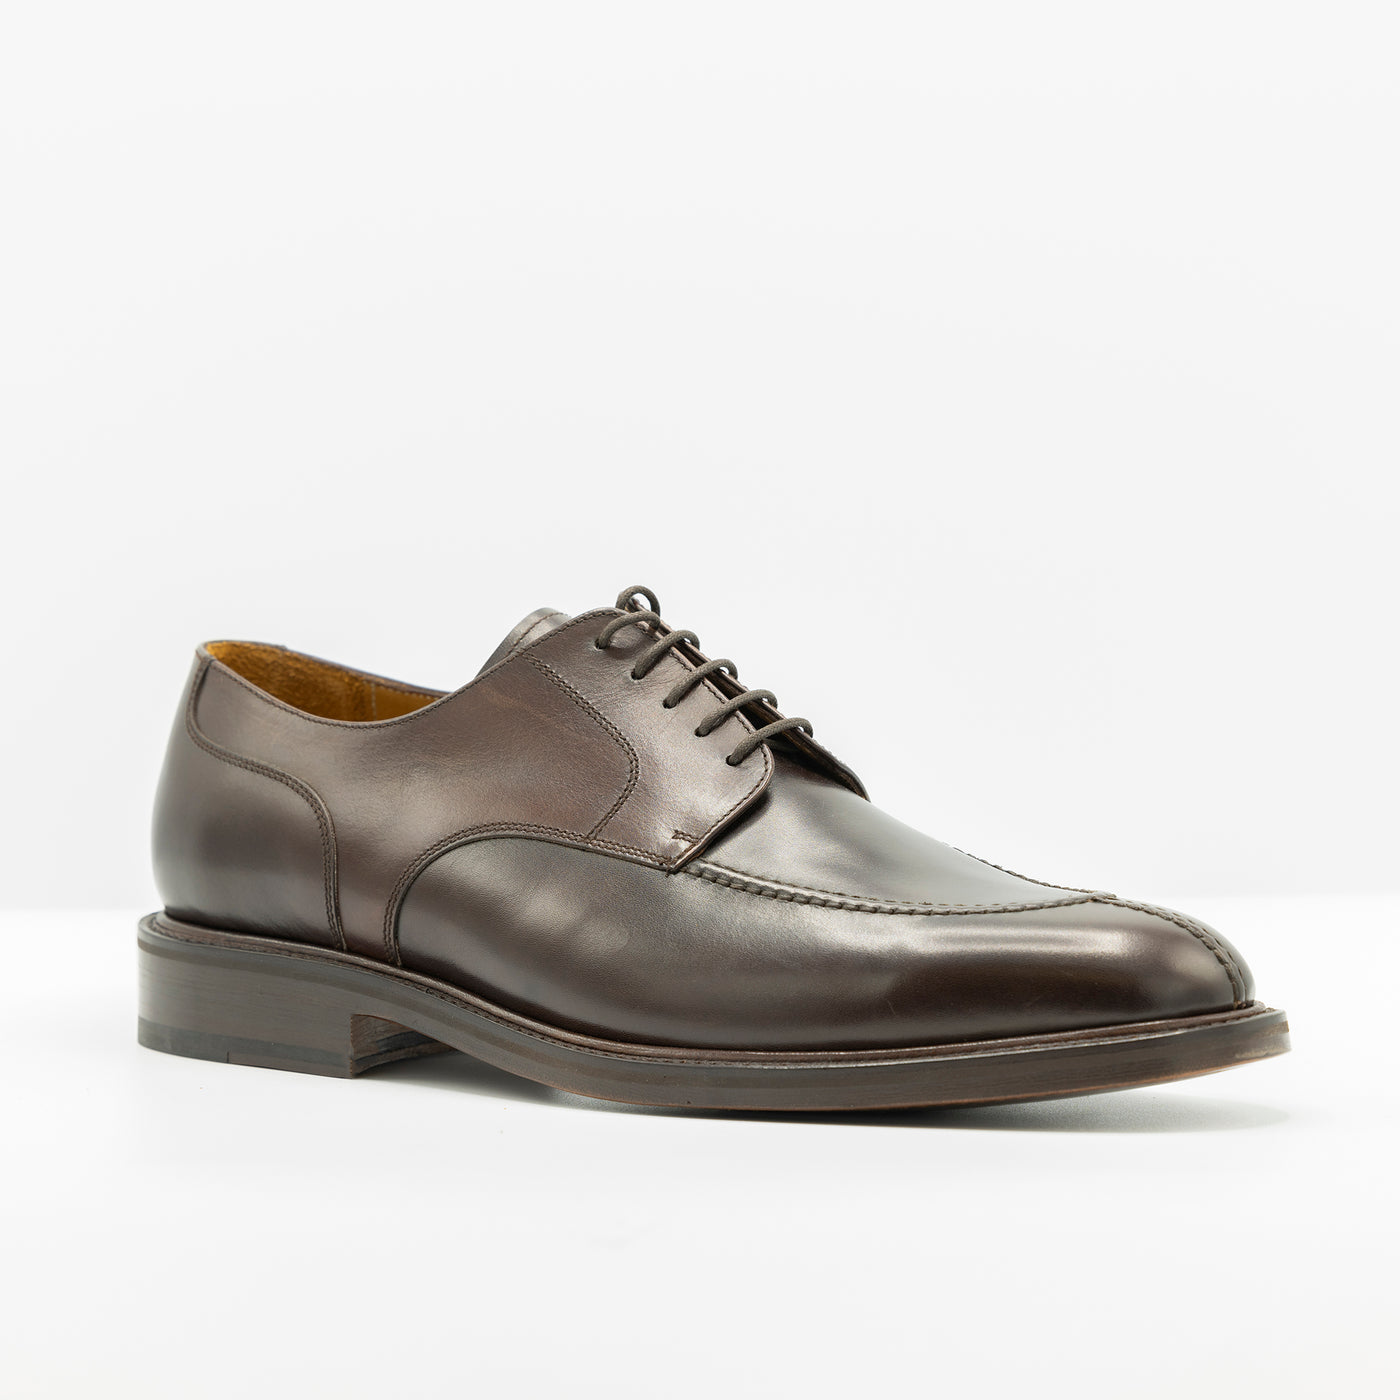 THE DERBY in BROWN LEATHER